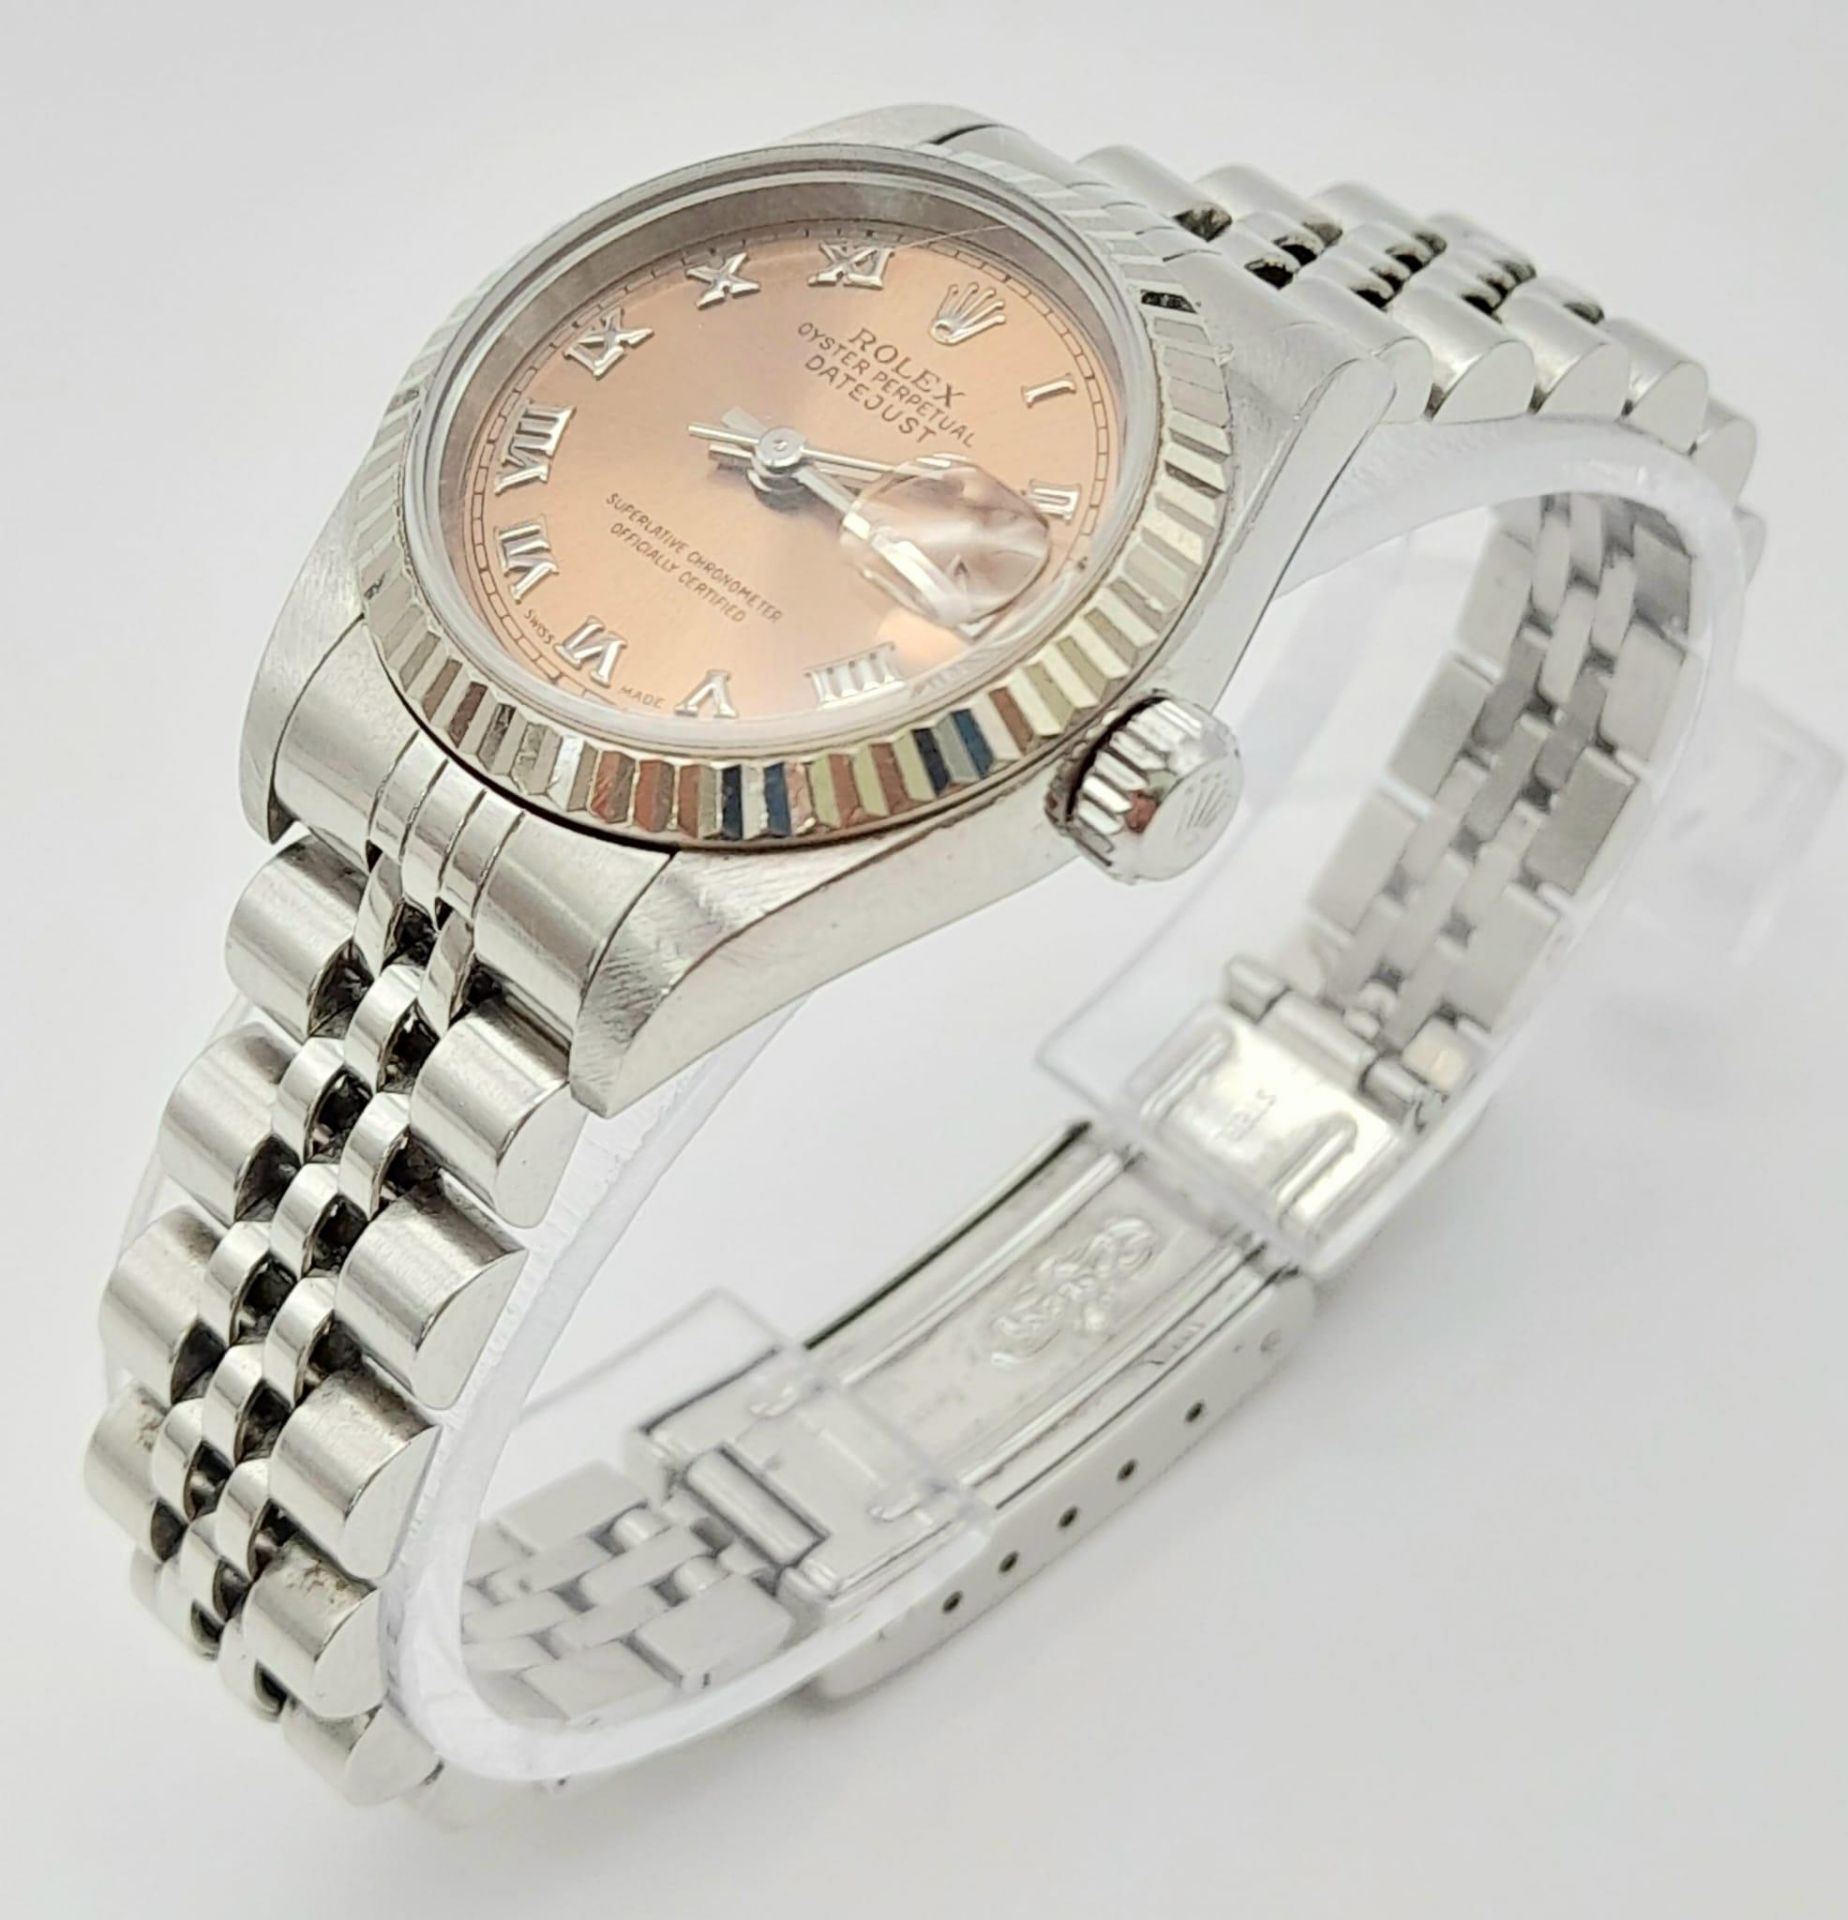 A Rolex Perpetual Datejust Ladies Watch. Stainless steel strap and case - 26mm. Rose gold tone dial. - Image 2 of 13